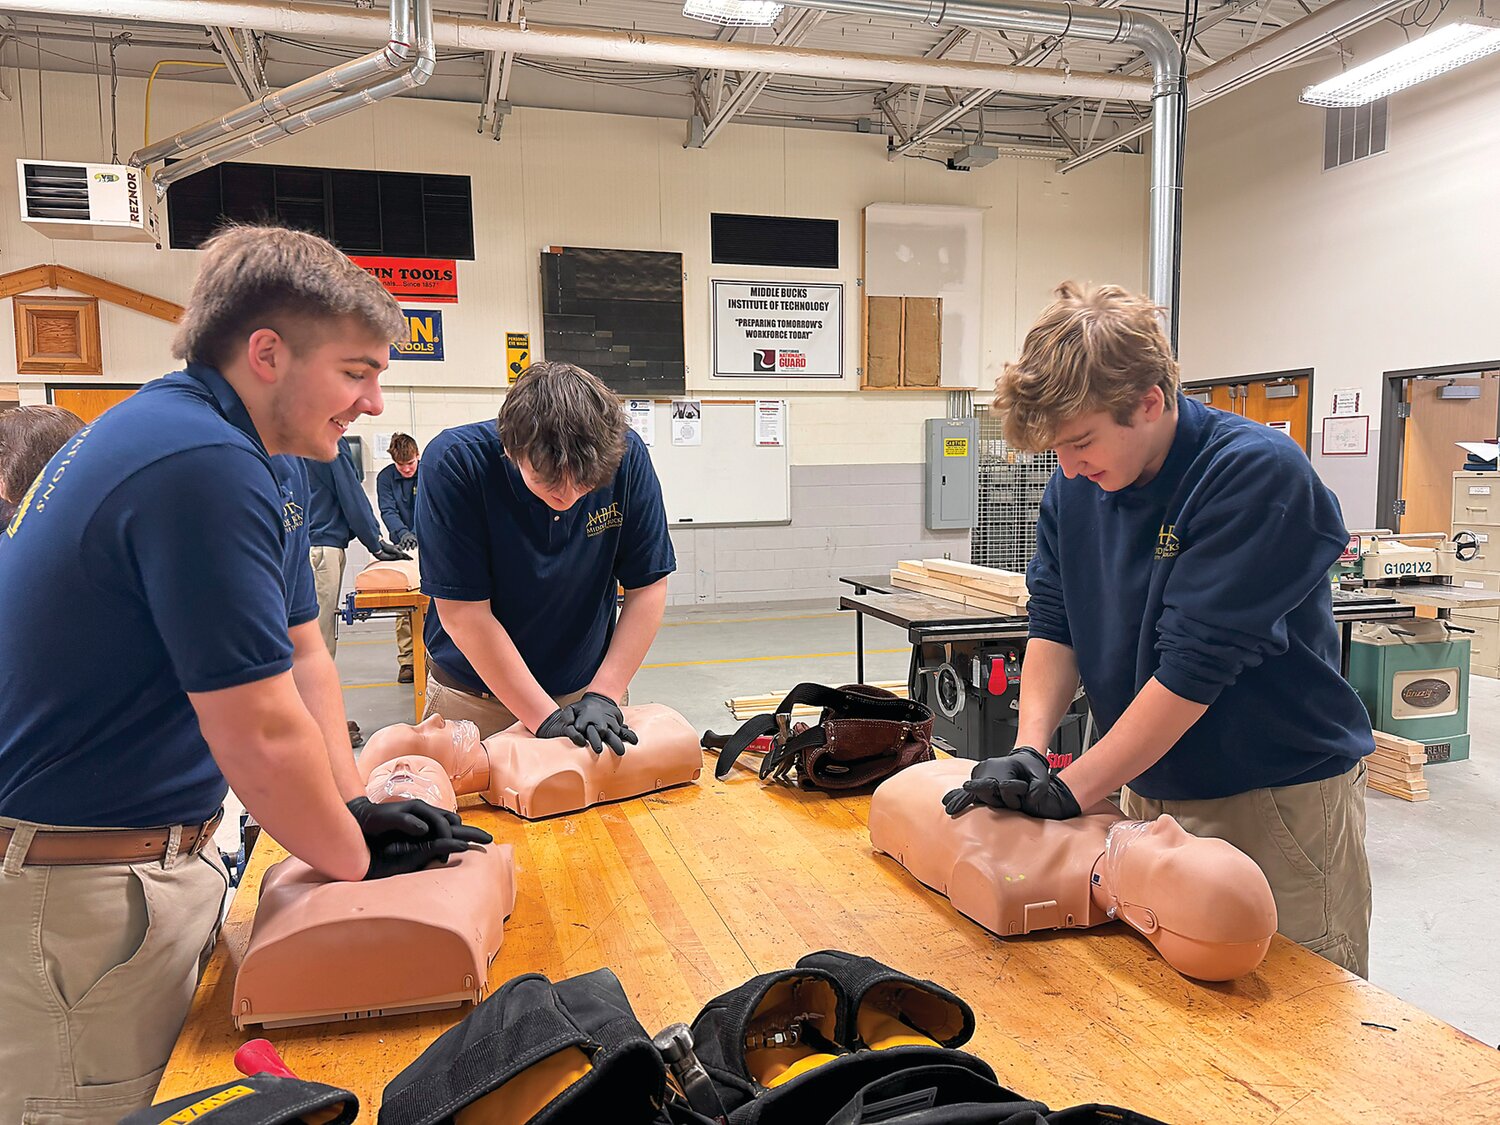 Building trades students at Middle Bucks Institute of Technology participate in CPR training.